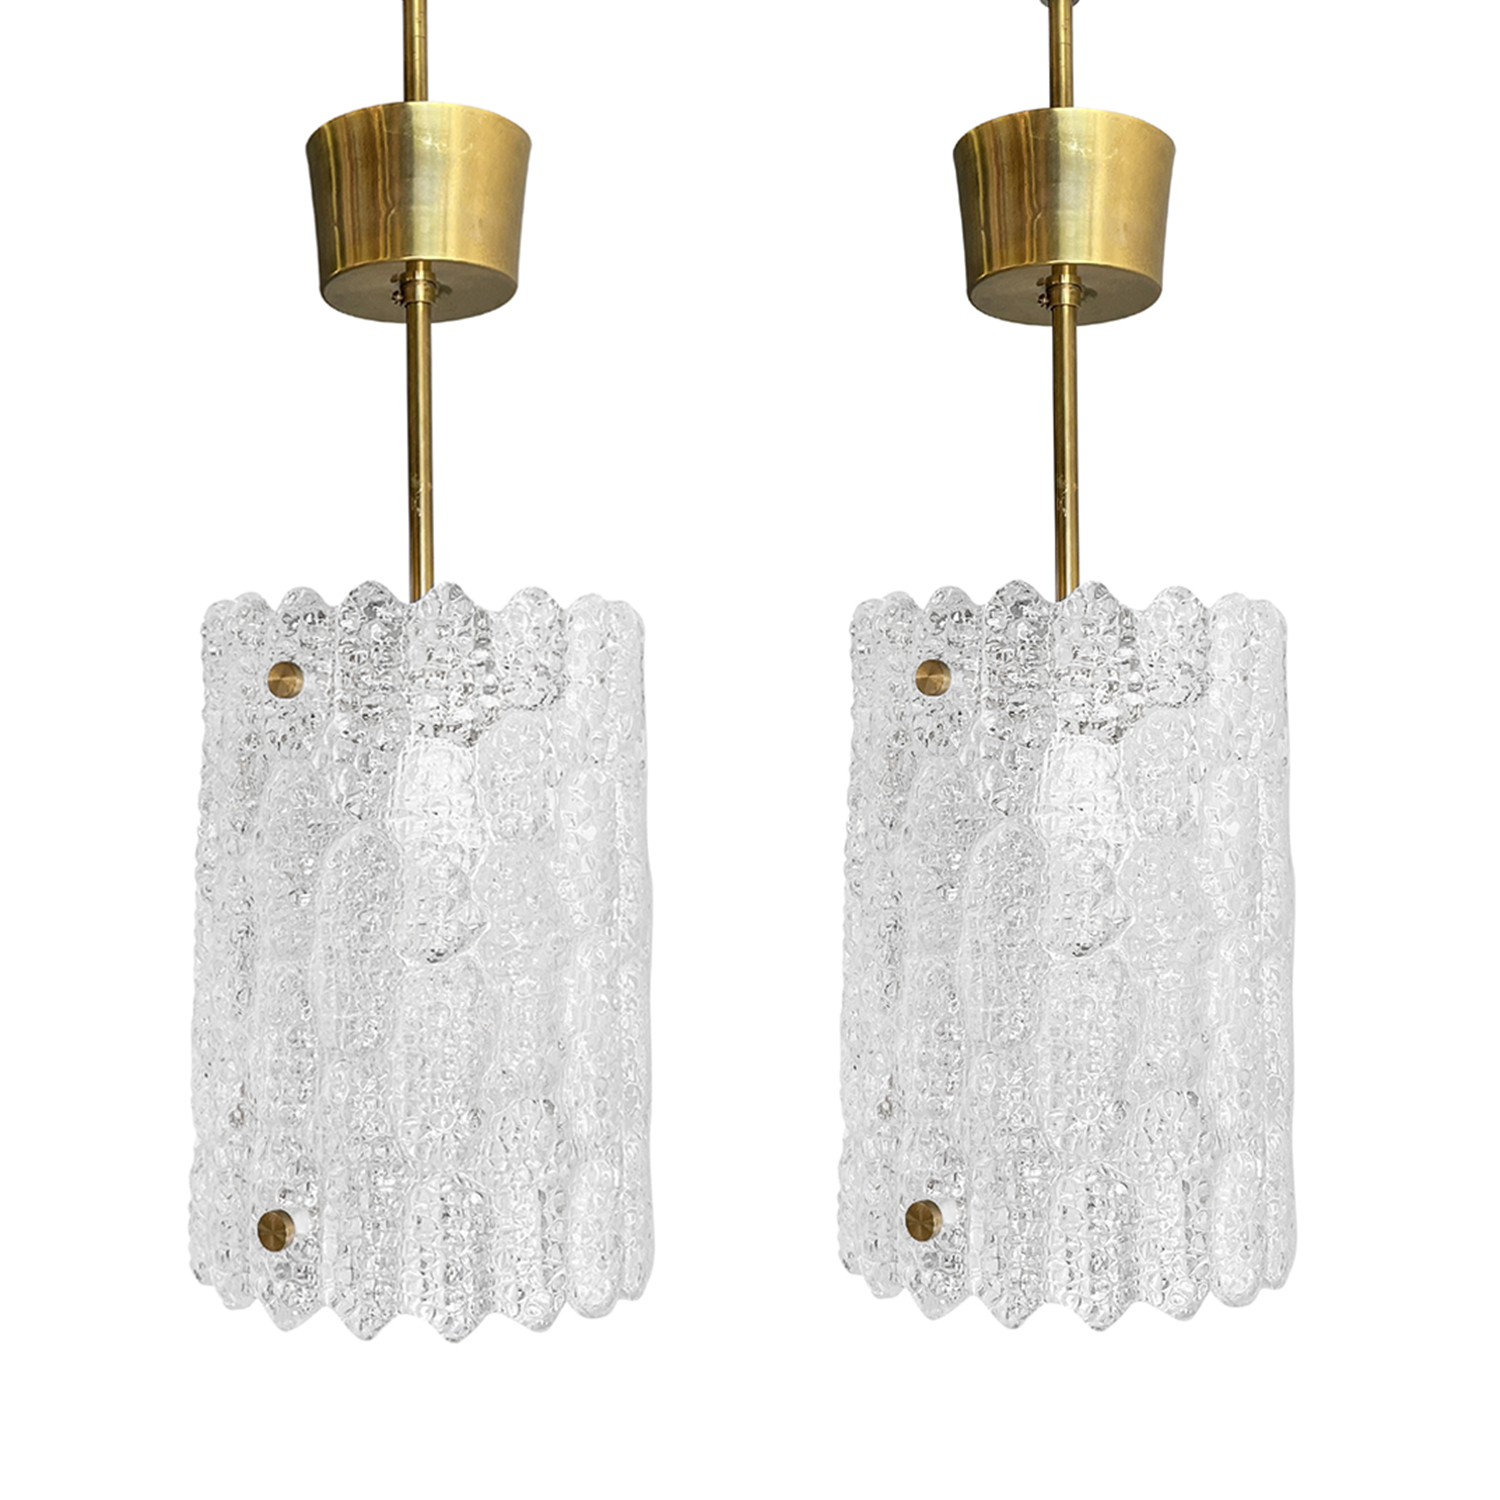 20th Century Swedish Pair of Orrefors Glass Ceiling Lights by Carl Fagerlund